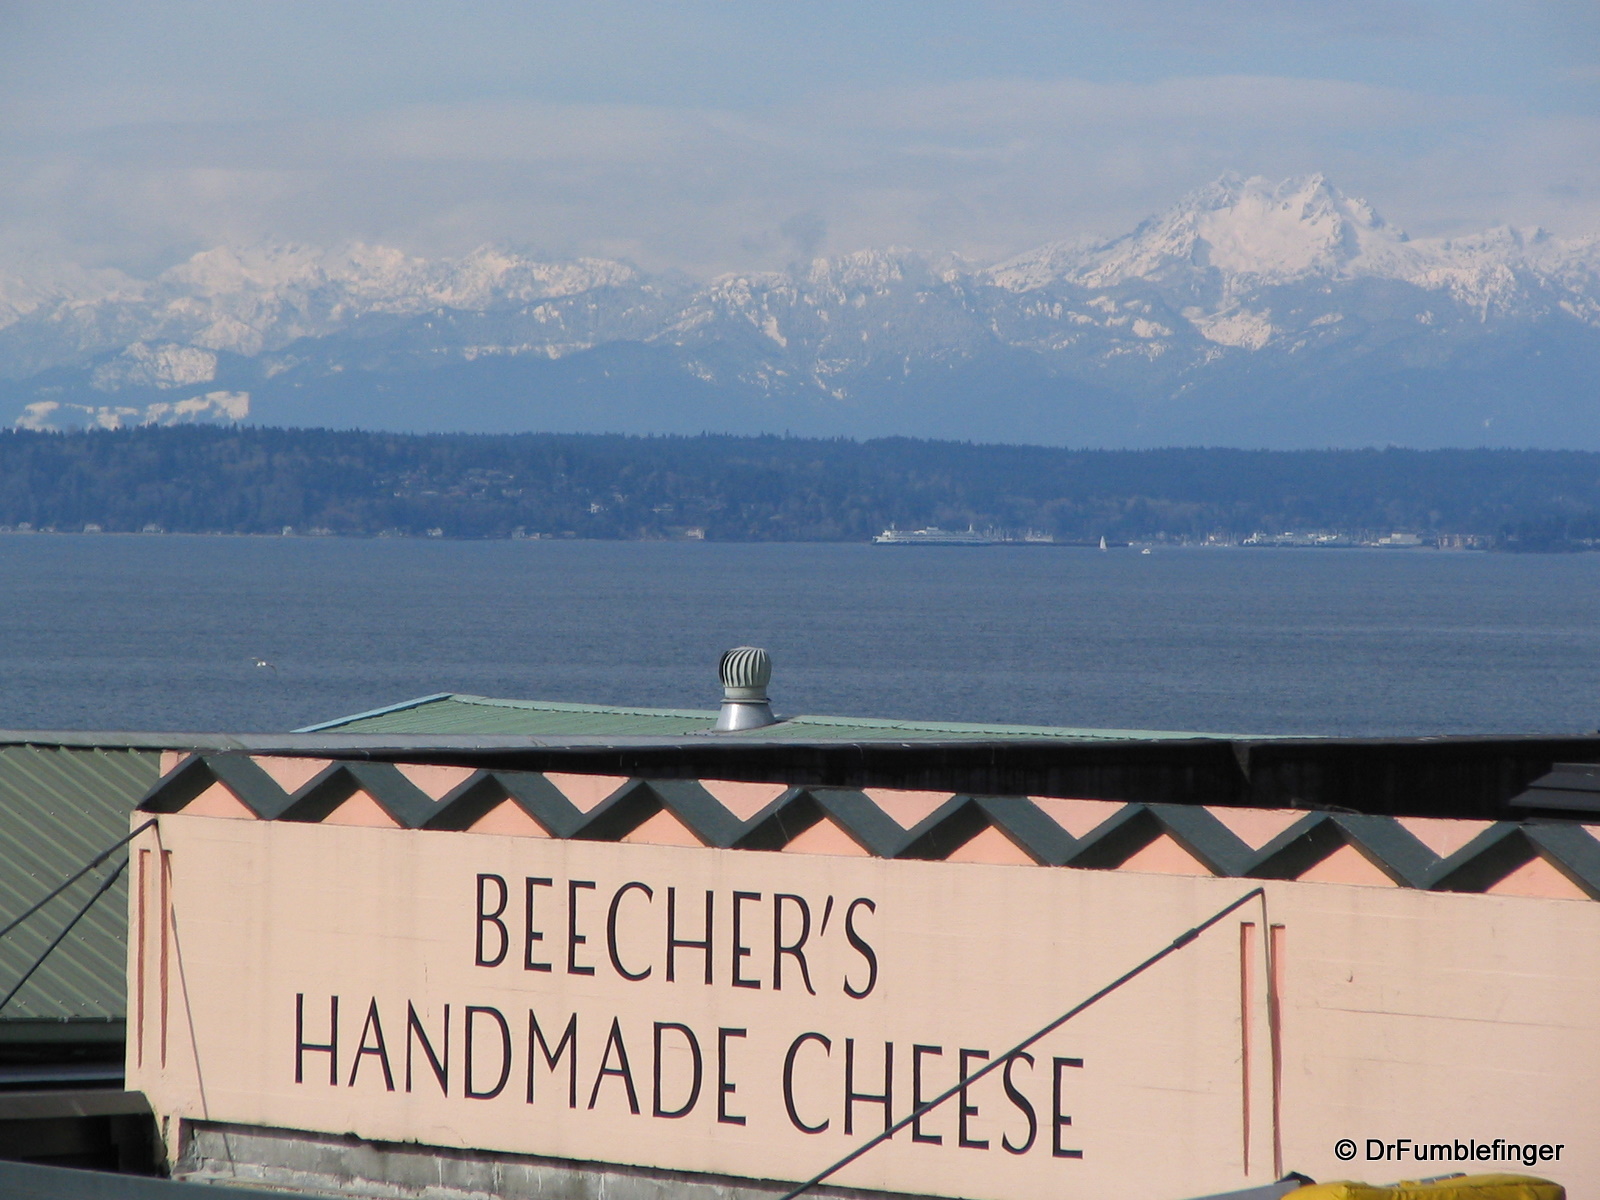 Puget Sound & Olympic Peninsula in backdrop